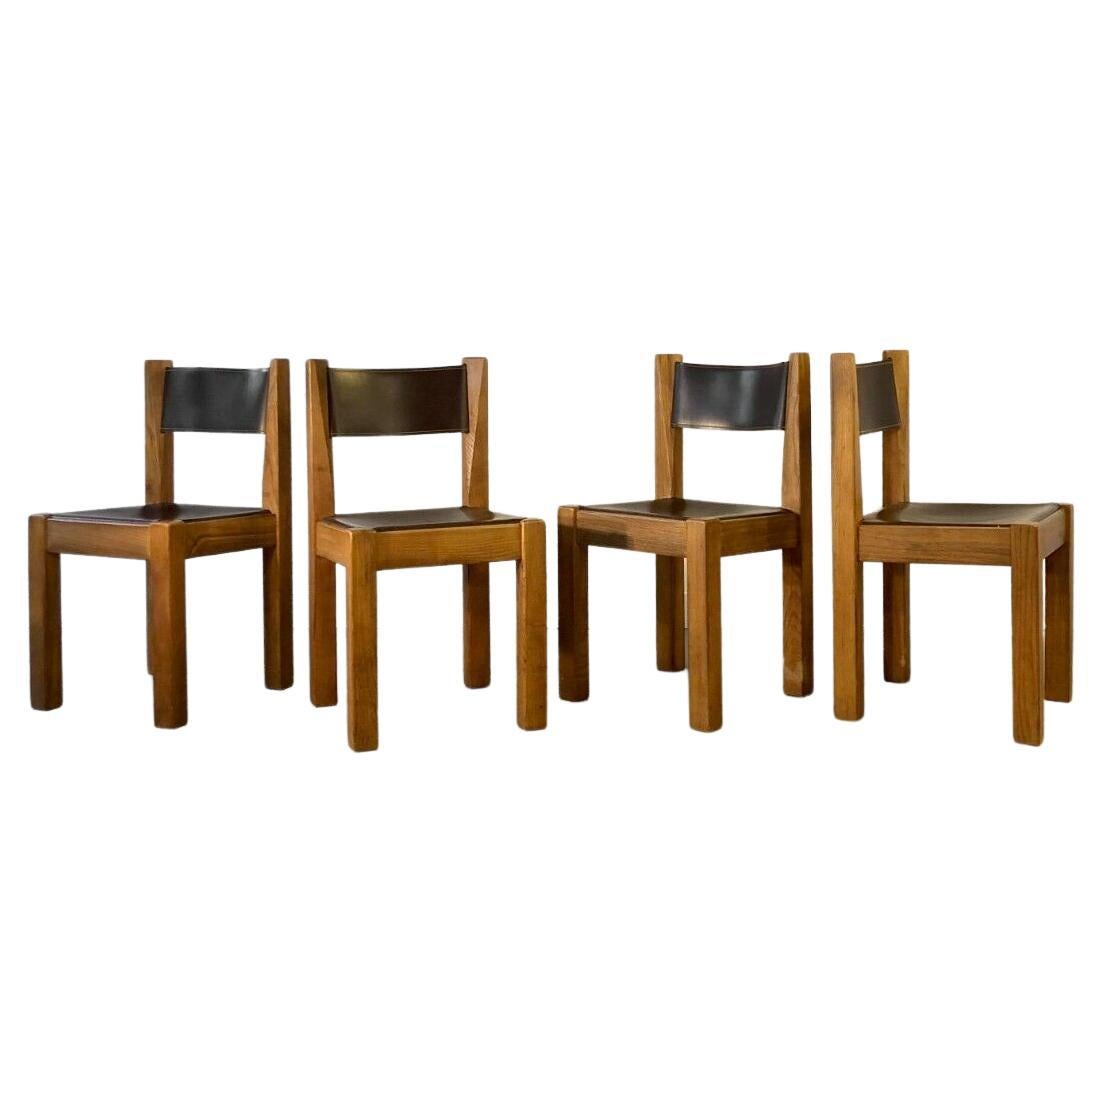 A Set of 4 BRUTALIST CHAIRS by MICHEL MILLERET, Pierre Chapo Style, France 1960